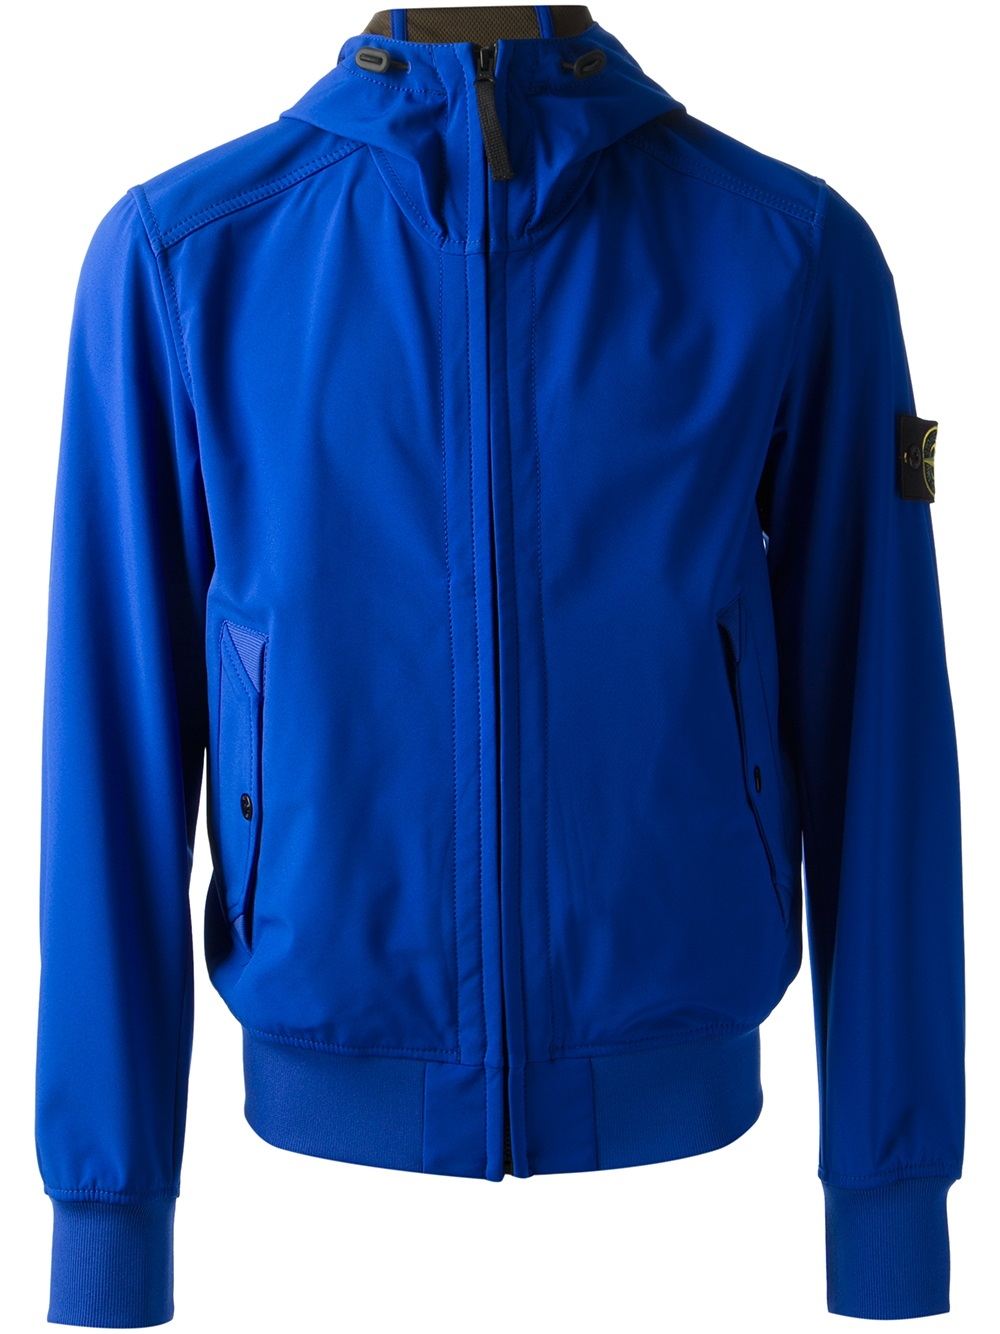 Stone Island Soft Shell Jacket in Blue for Men - Lyst